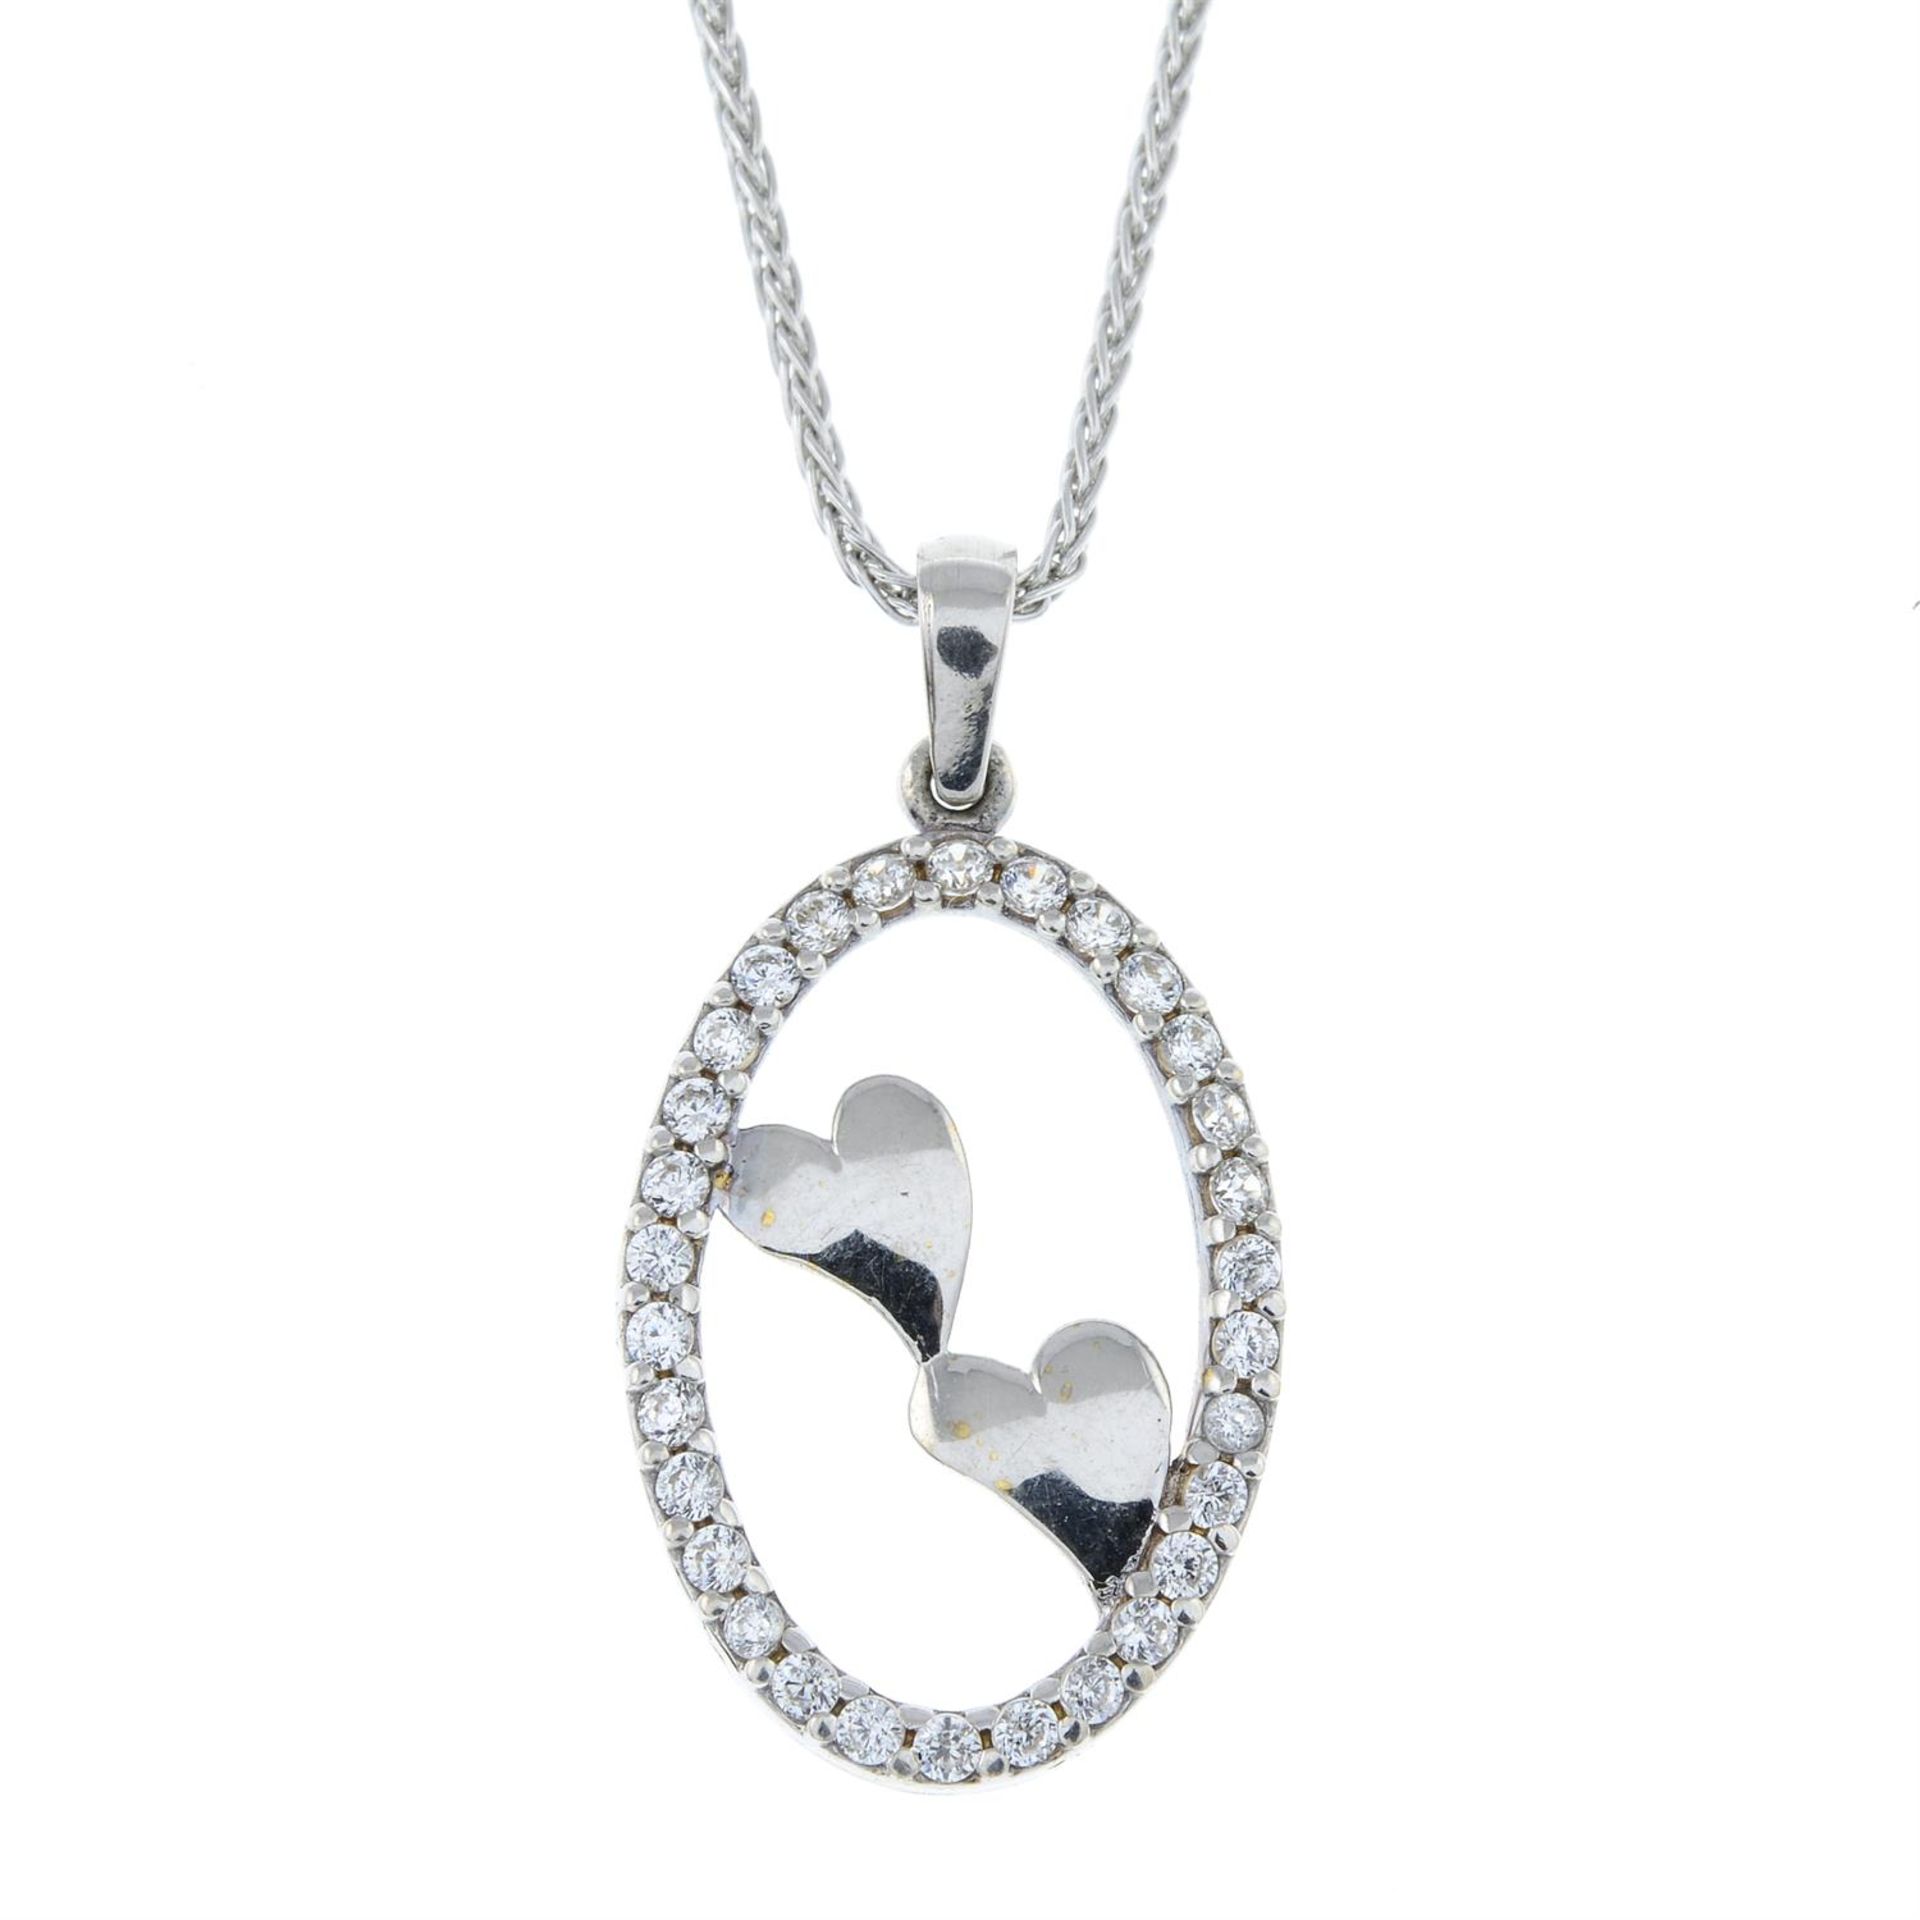 An 18ct gold cubic zirconia pendant, with 18ct gold chain.